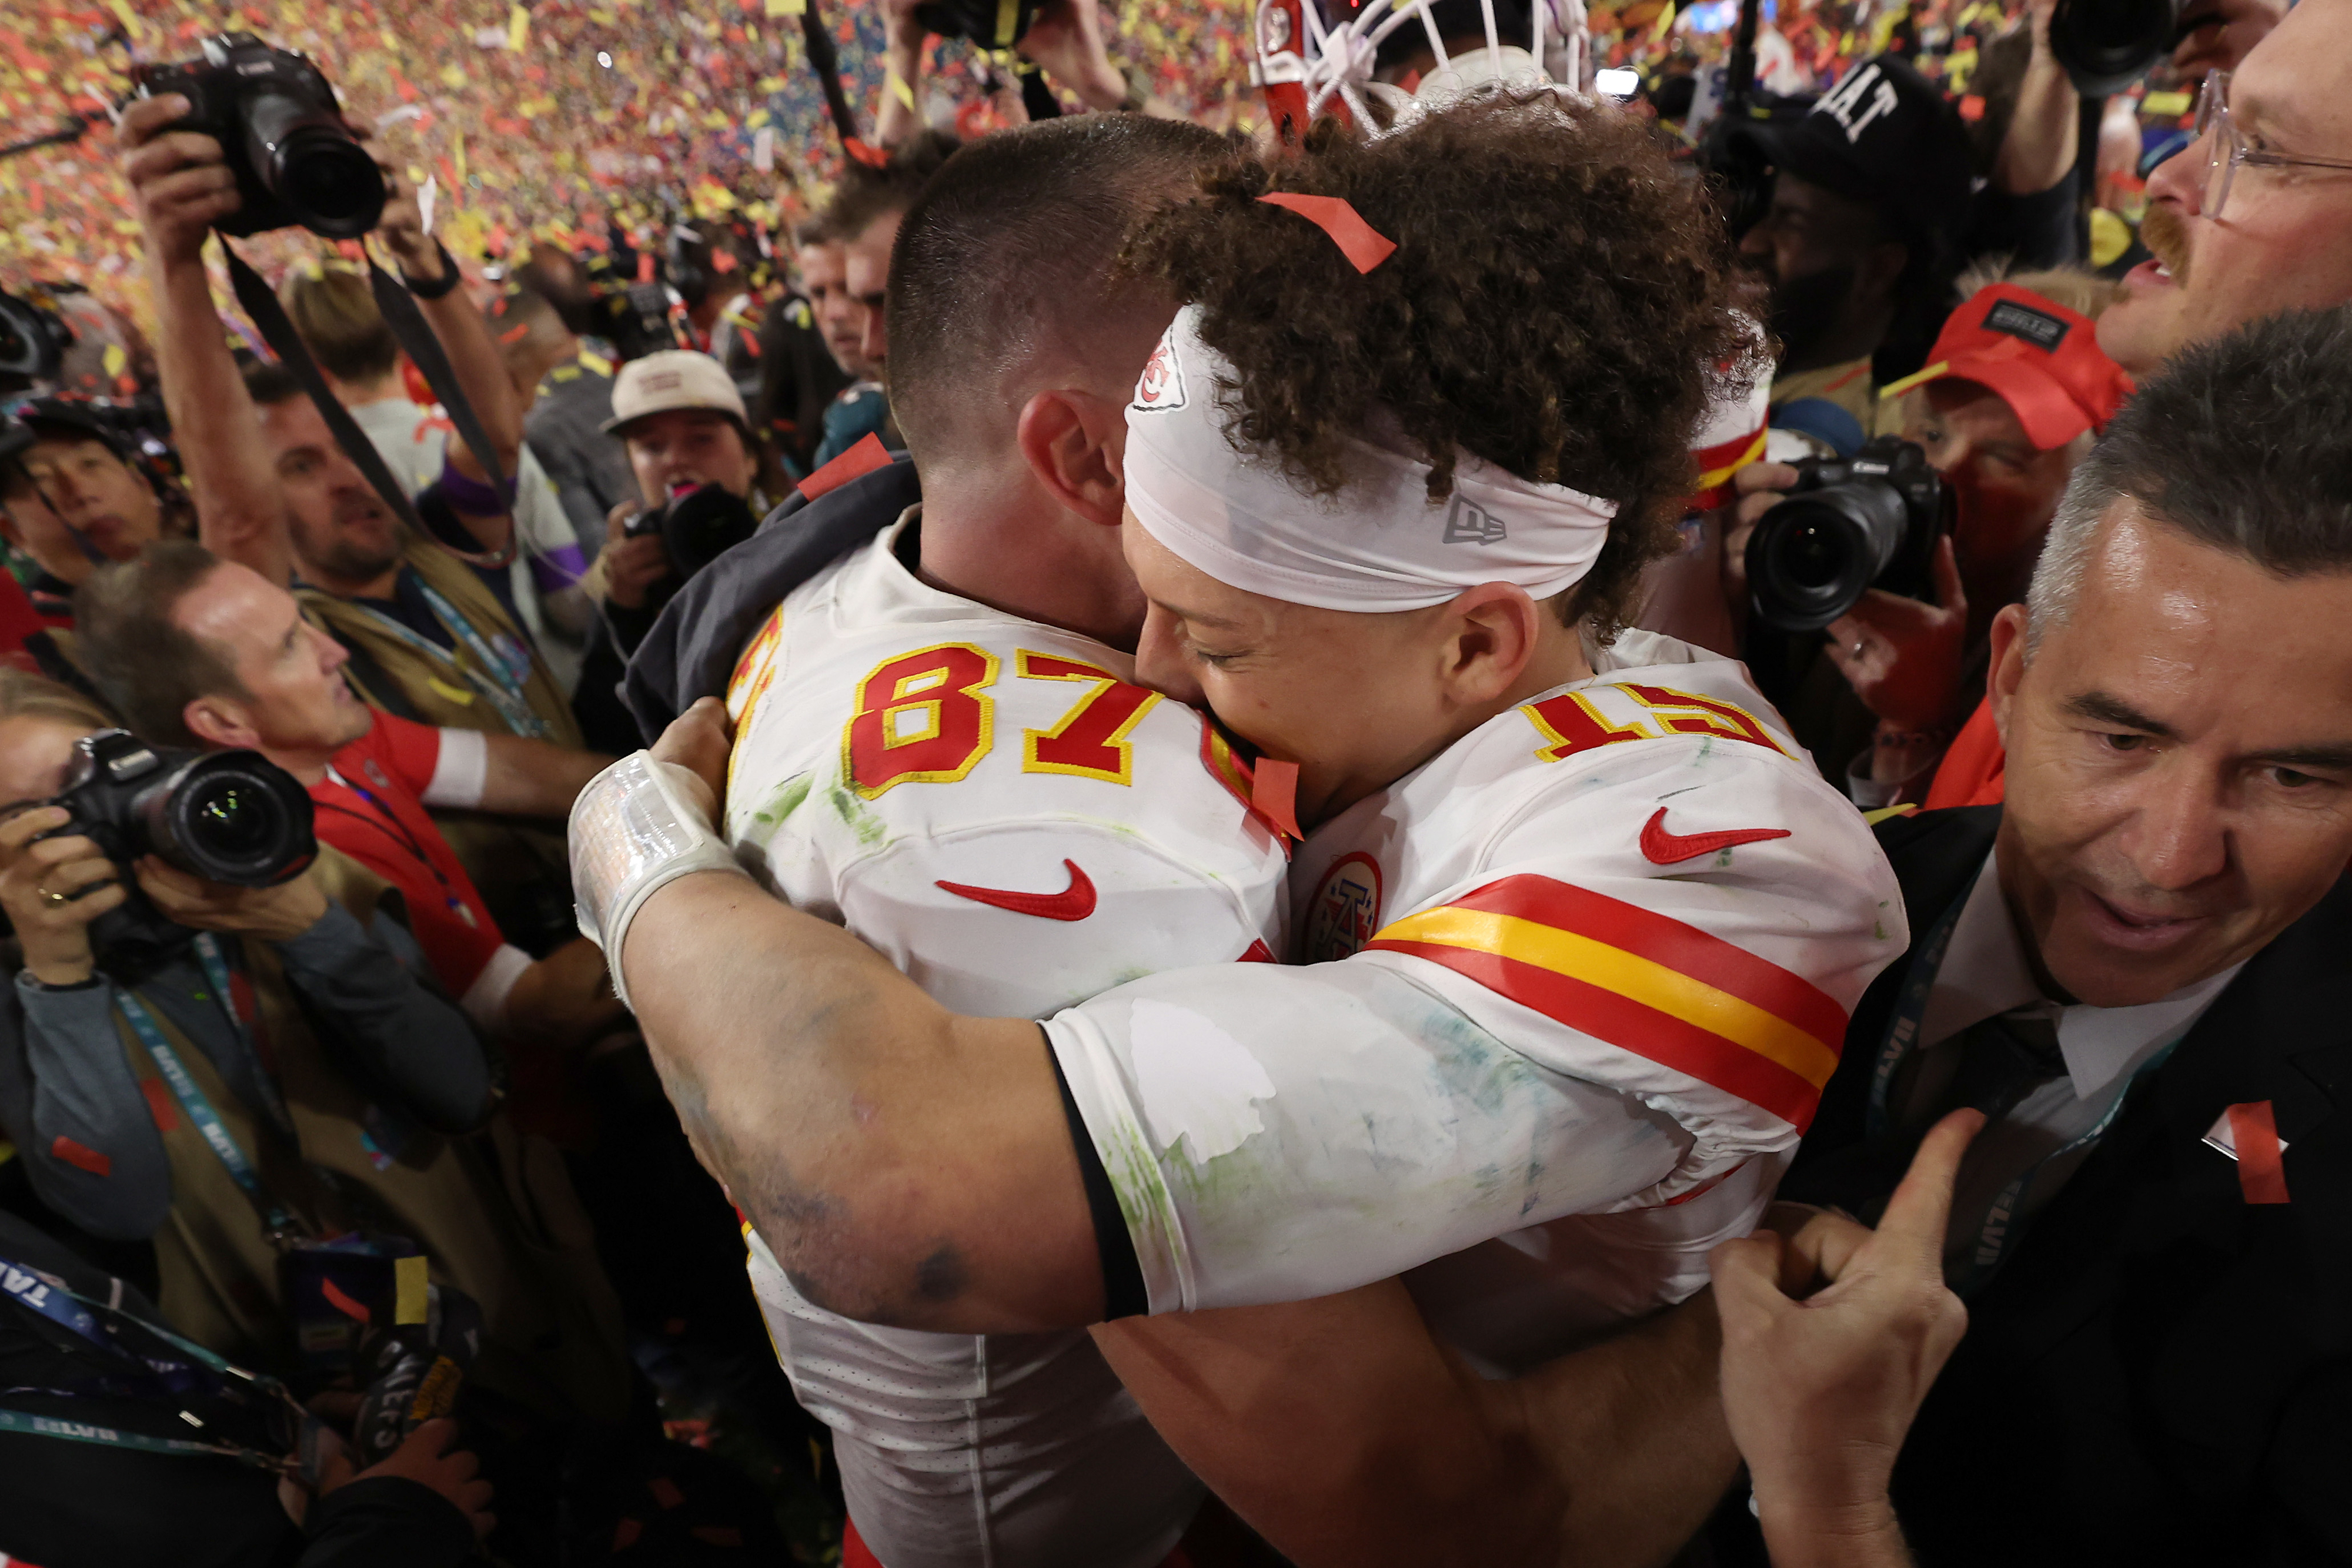 Travis and Patrick embracing after a game